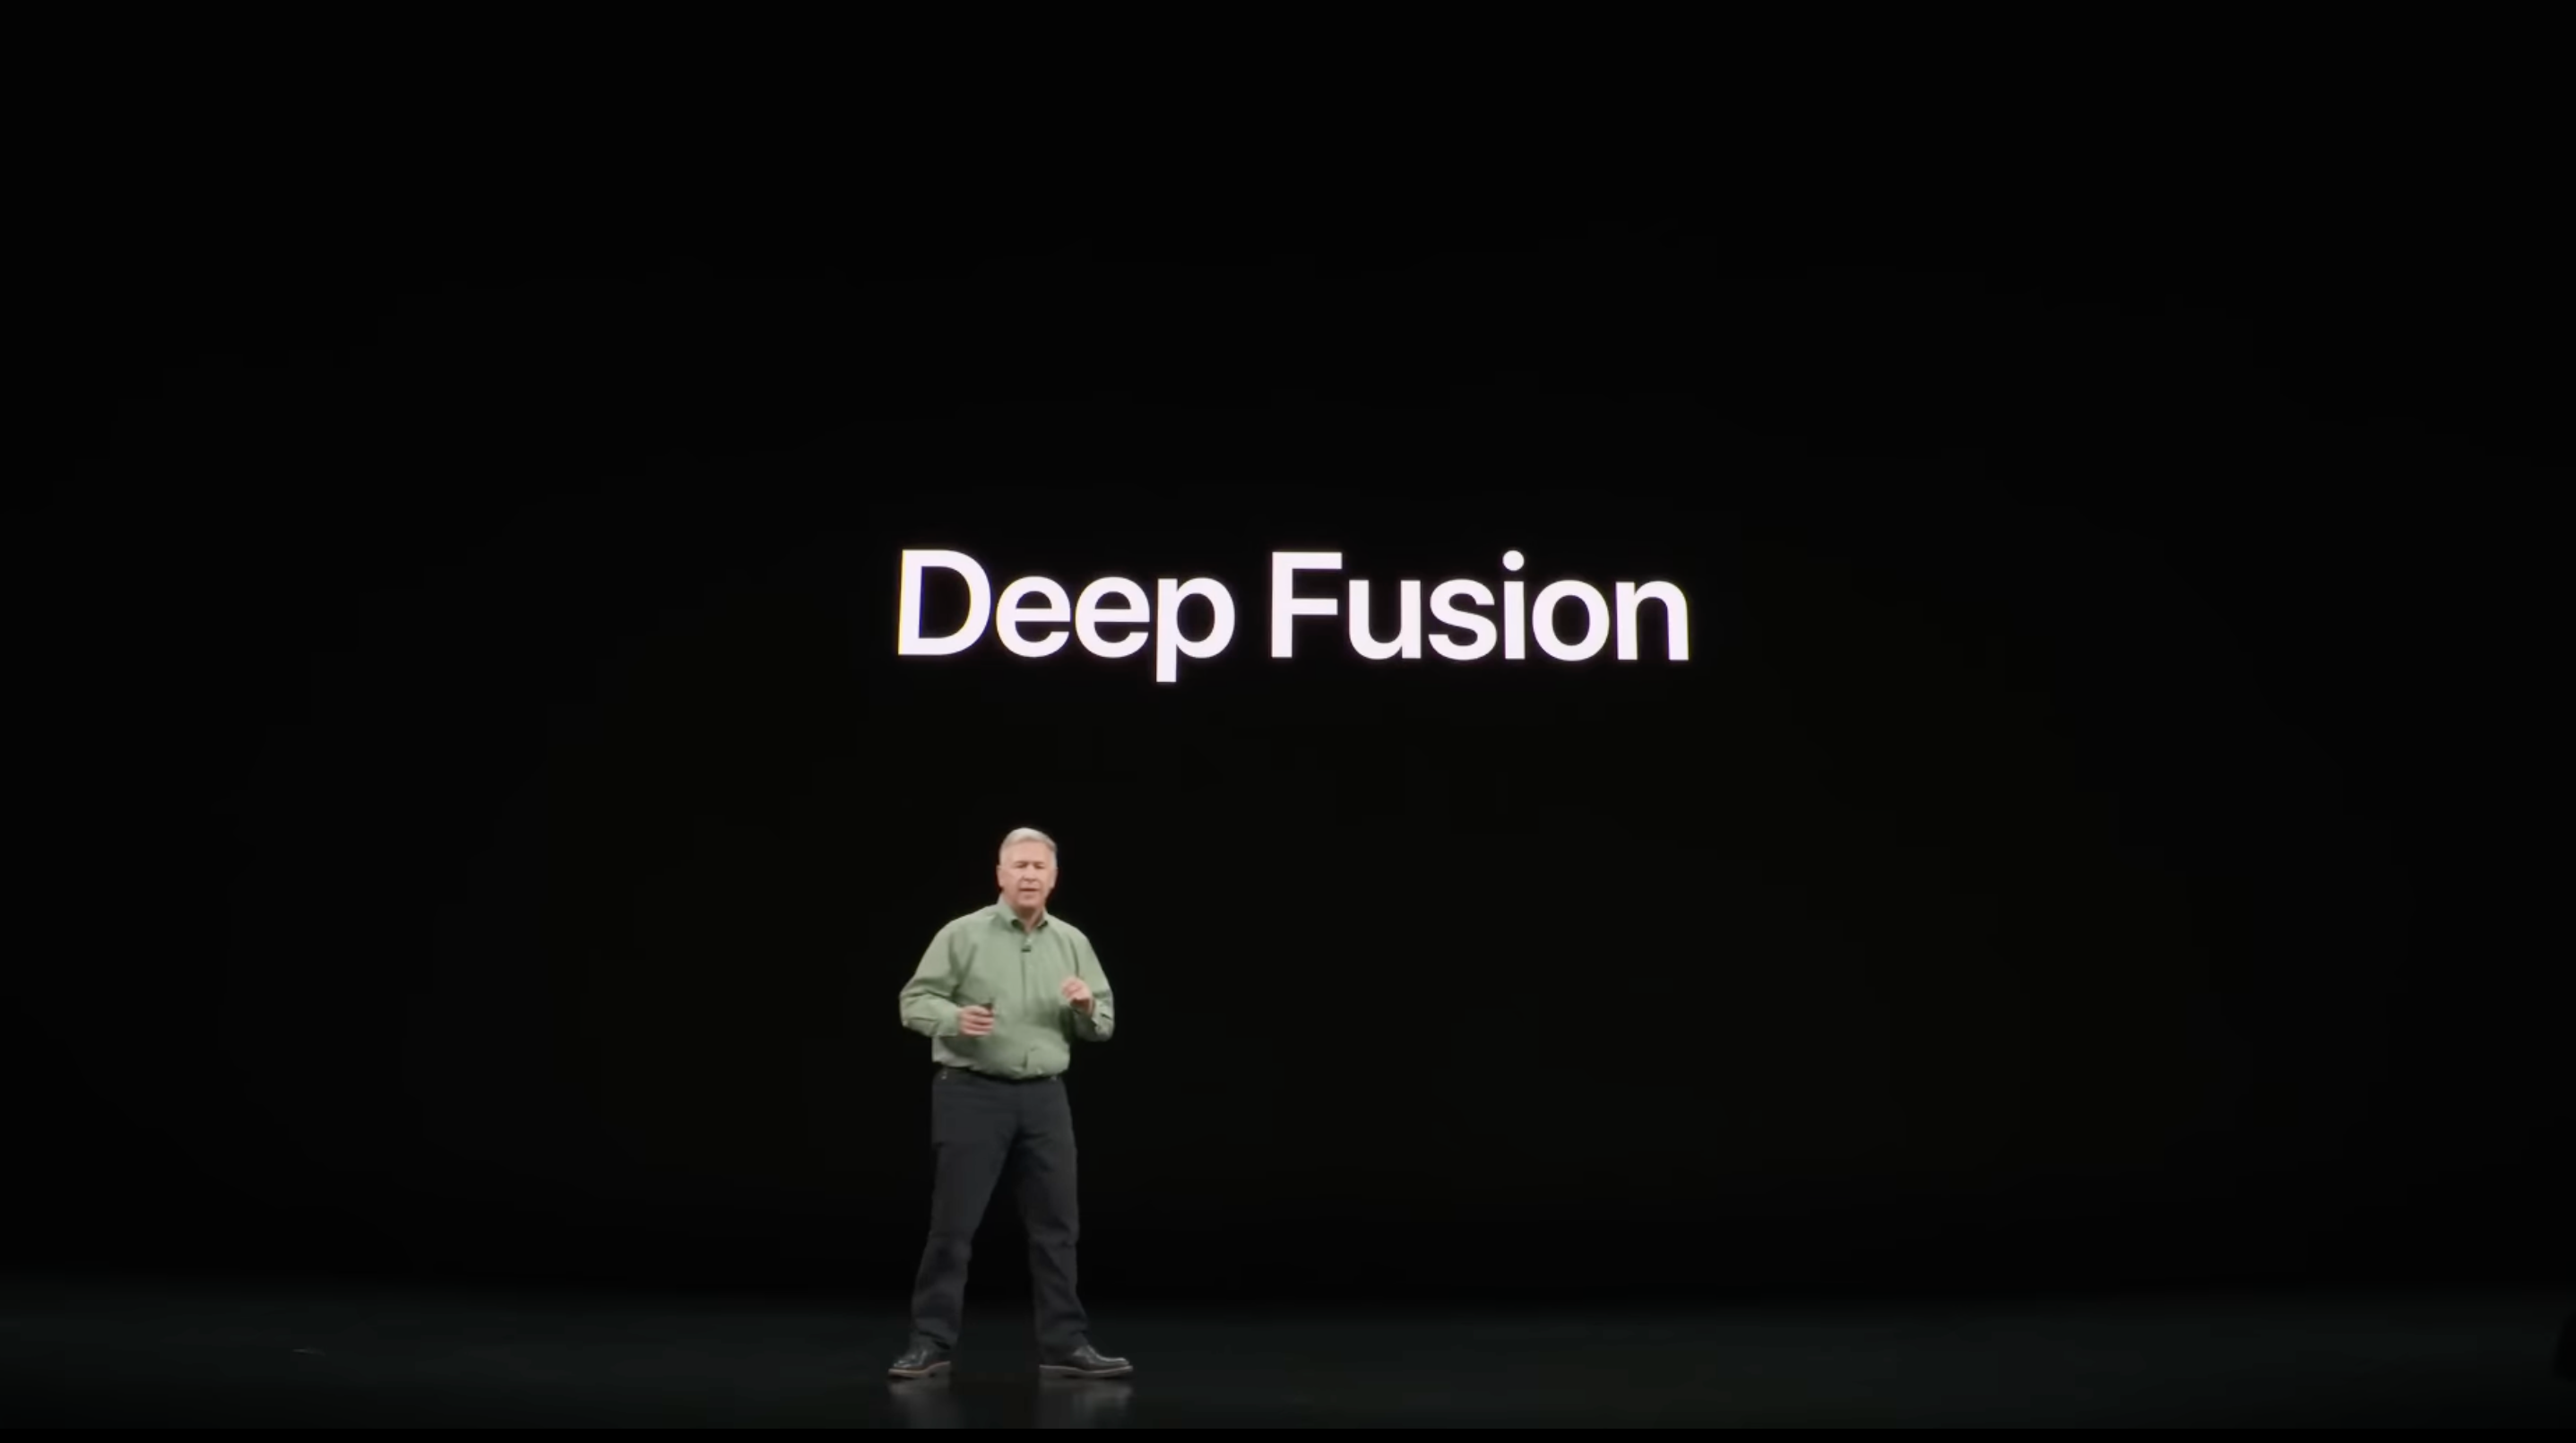 Phil Schiller on stage during iPhone 11 launch event. 